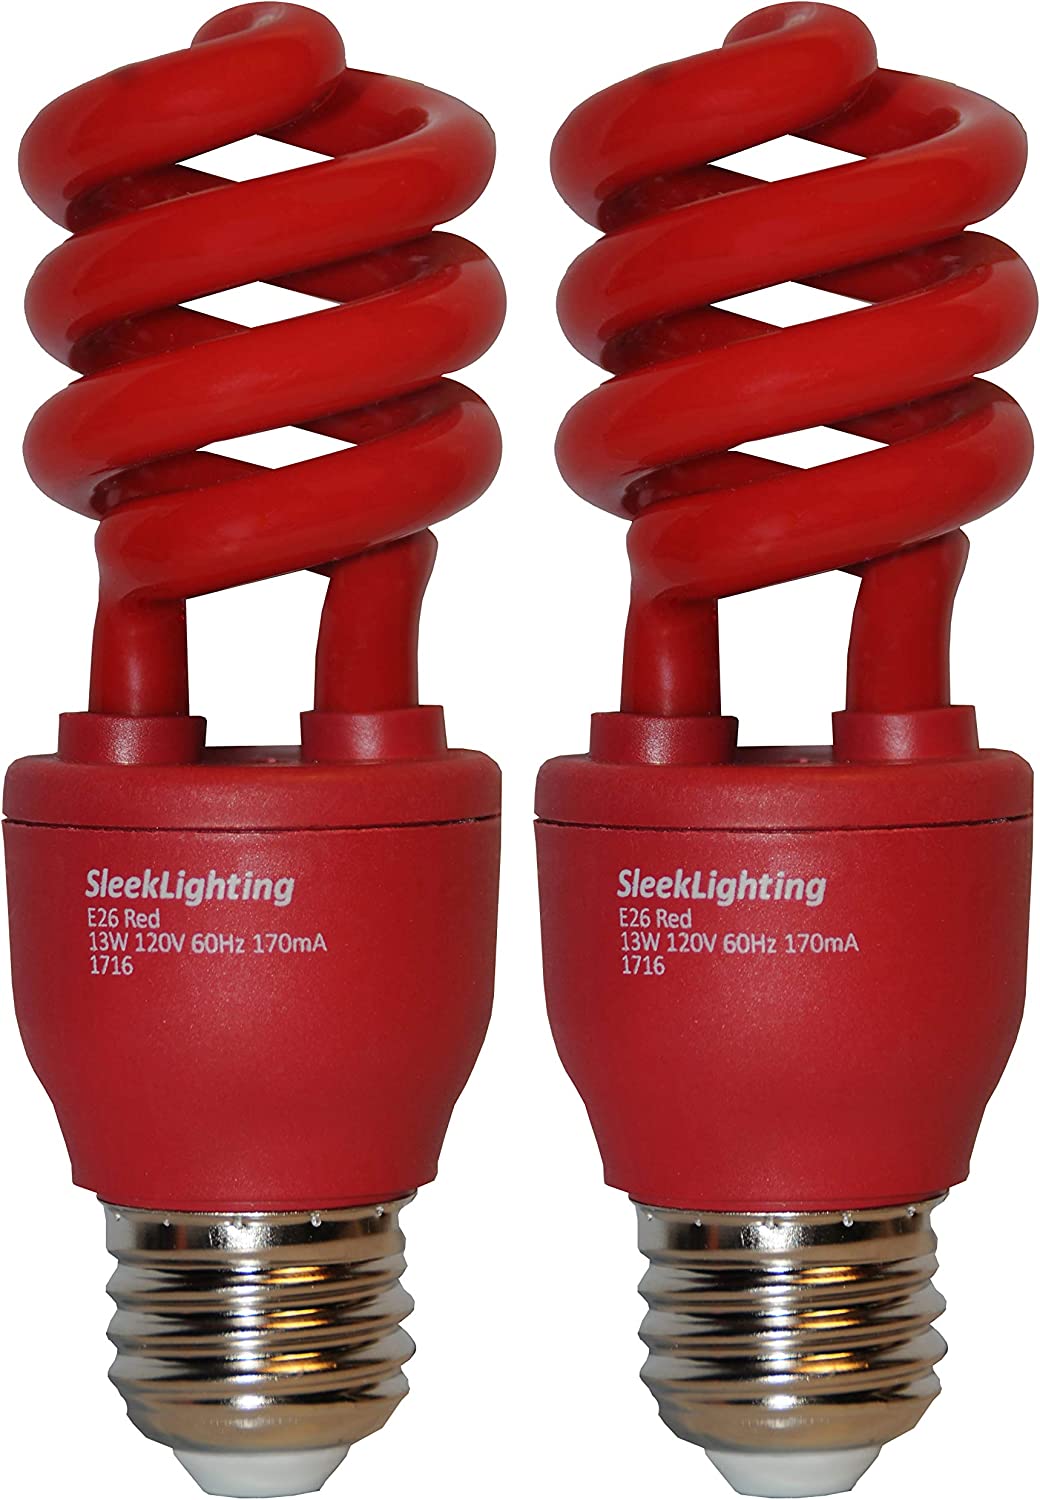 SleekLighting 13 Watt Red Bug Light Bulbs for Outdoor – General Purpose Spiral CFL Red Light Bulbs- UL Approved- Uses 13 Watts of Energy, 120 Volts, E26 Medium Base. (Pack of 2)